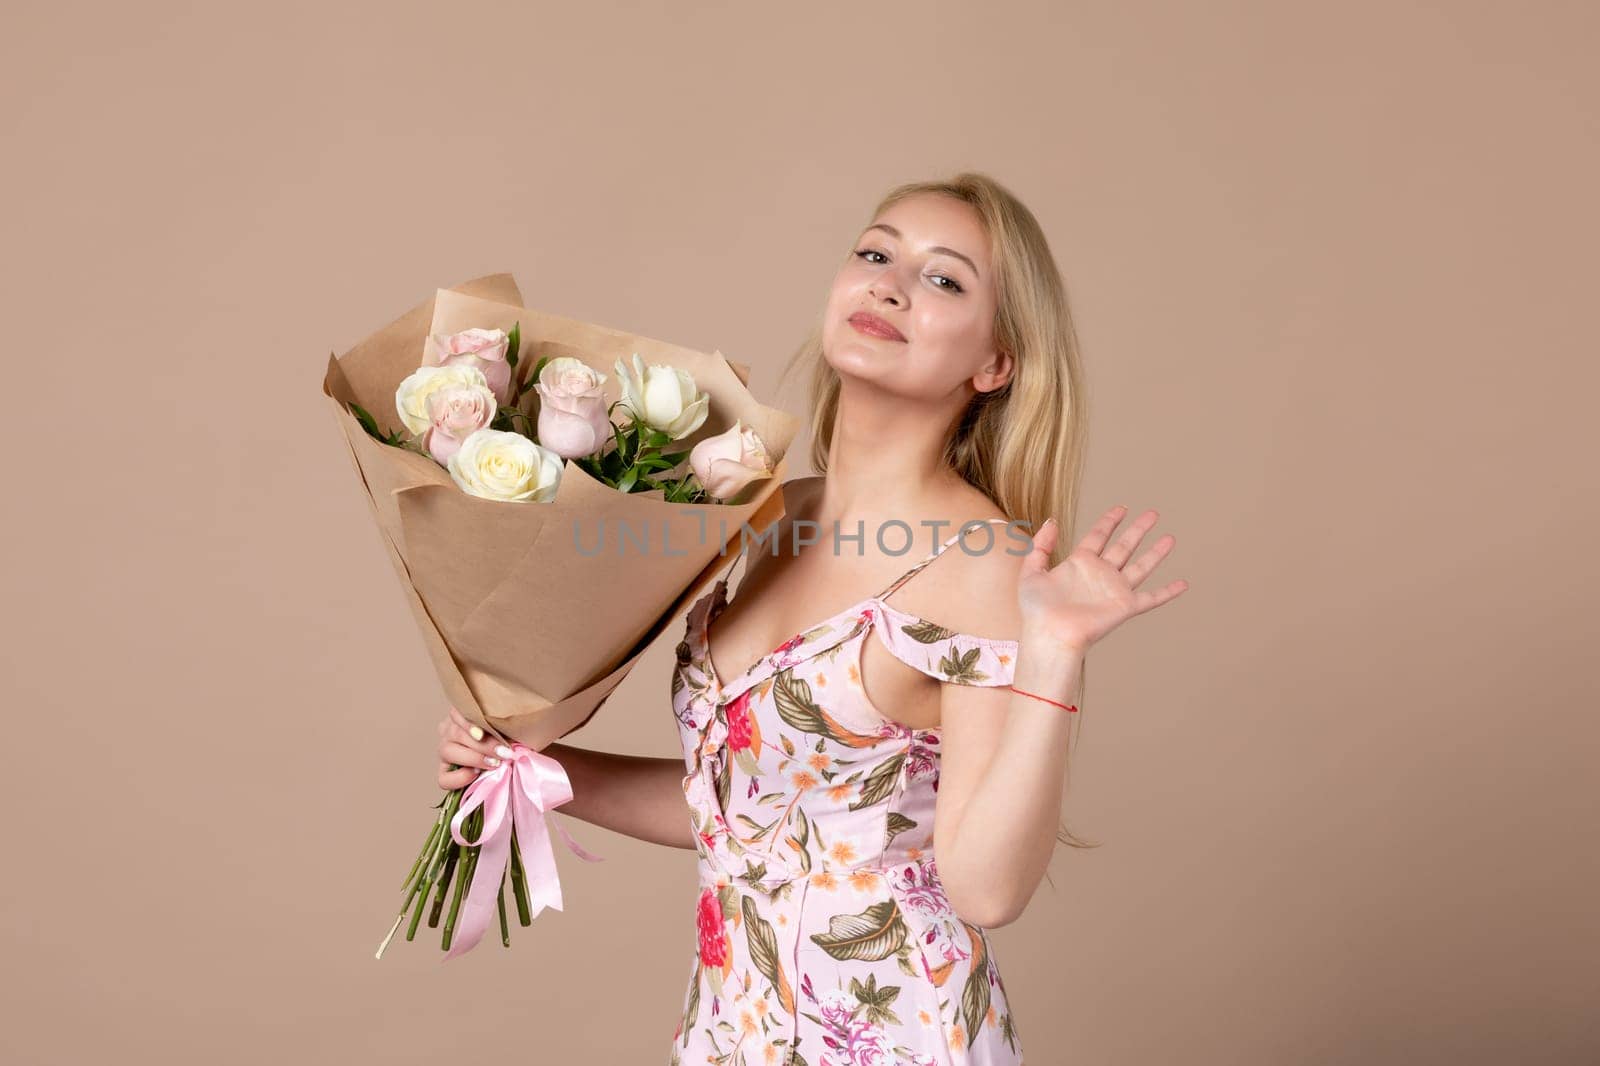 front view young female posing with bouquet of beautiful roses on brown background feminine sensual woman march gift marriage equality